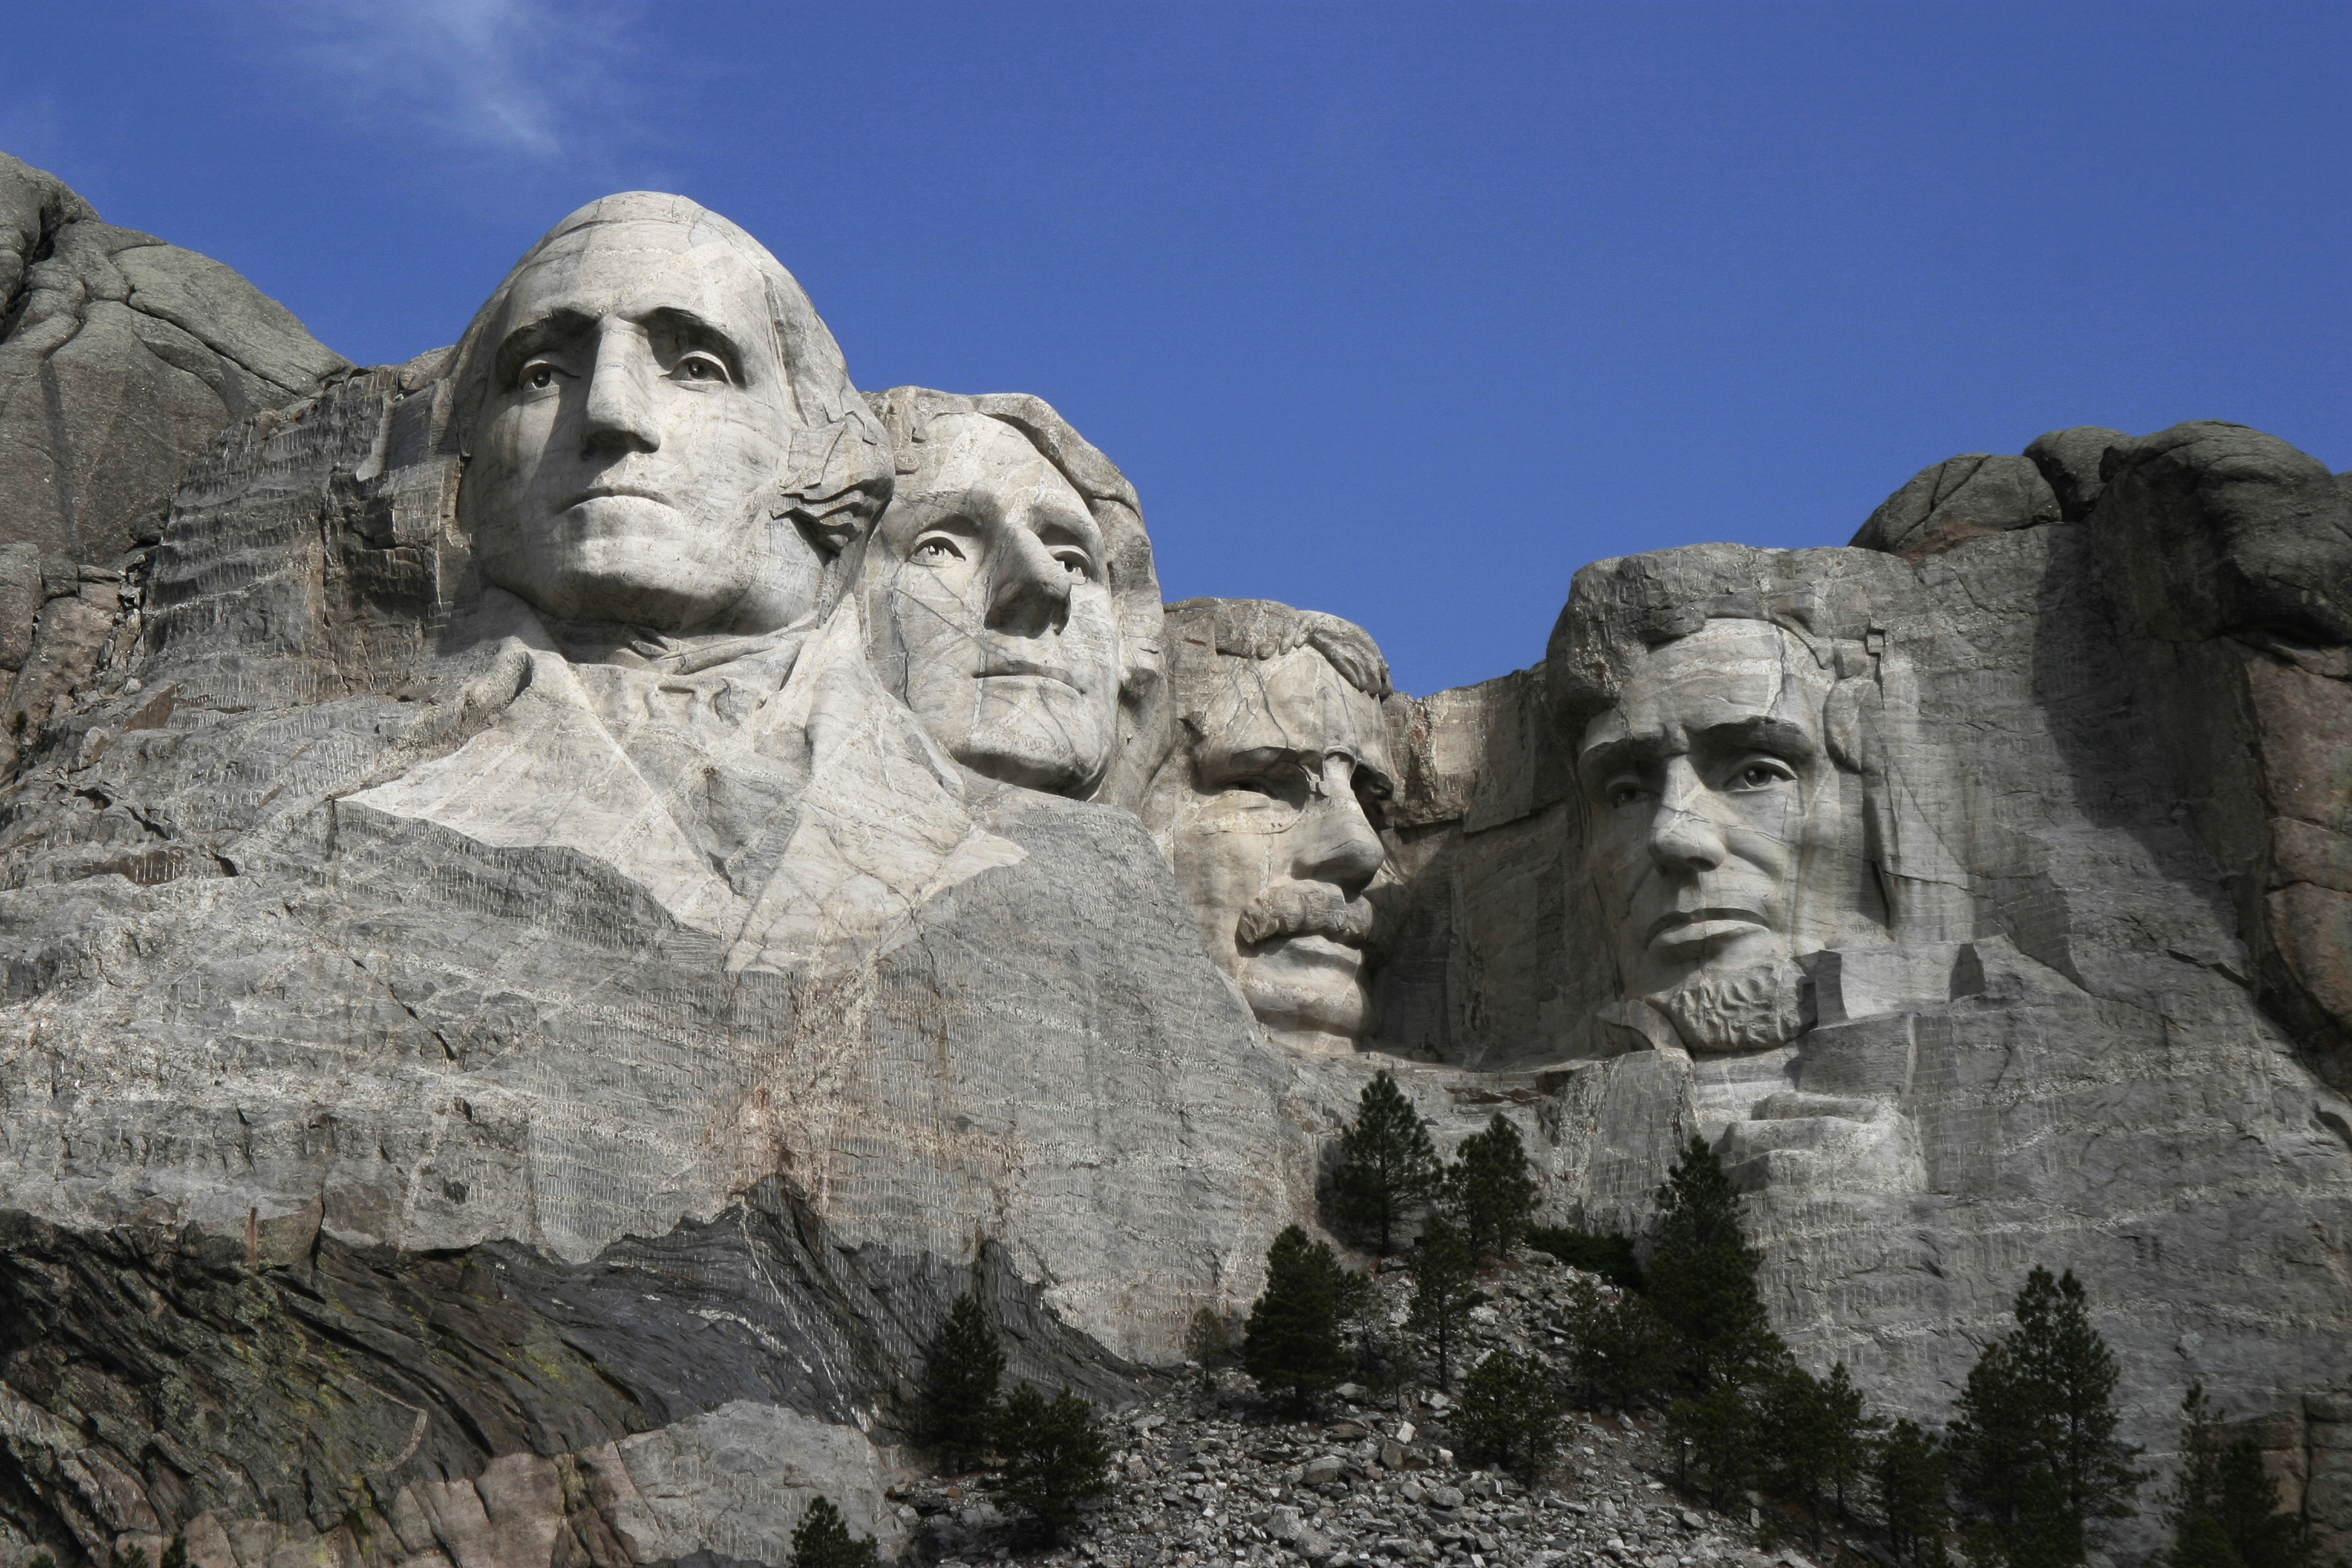 Mount Rushmore National Memorial is a sculpture carved into the granite face of Mount Rushmore near Keystone, South Dakota, in the United States